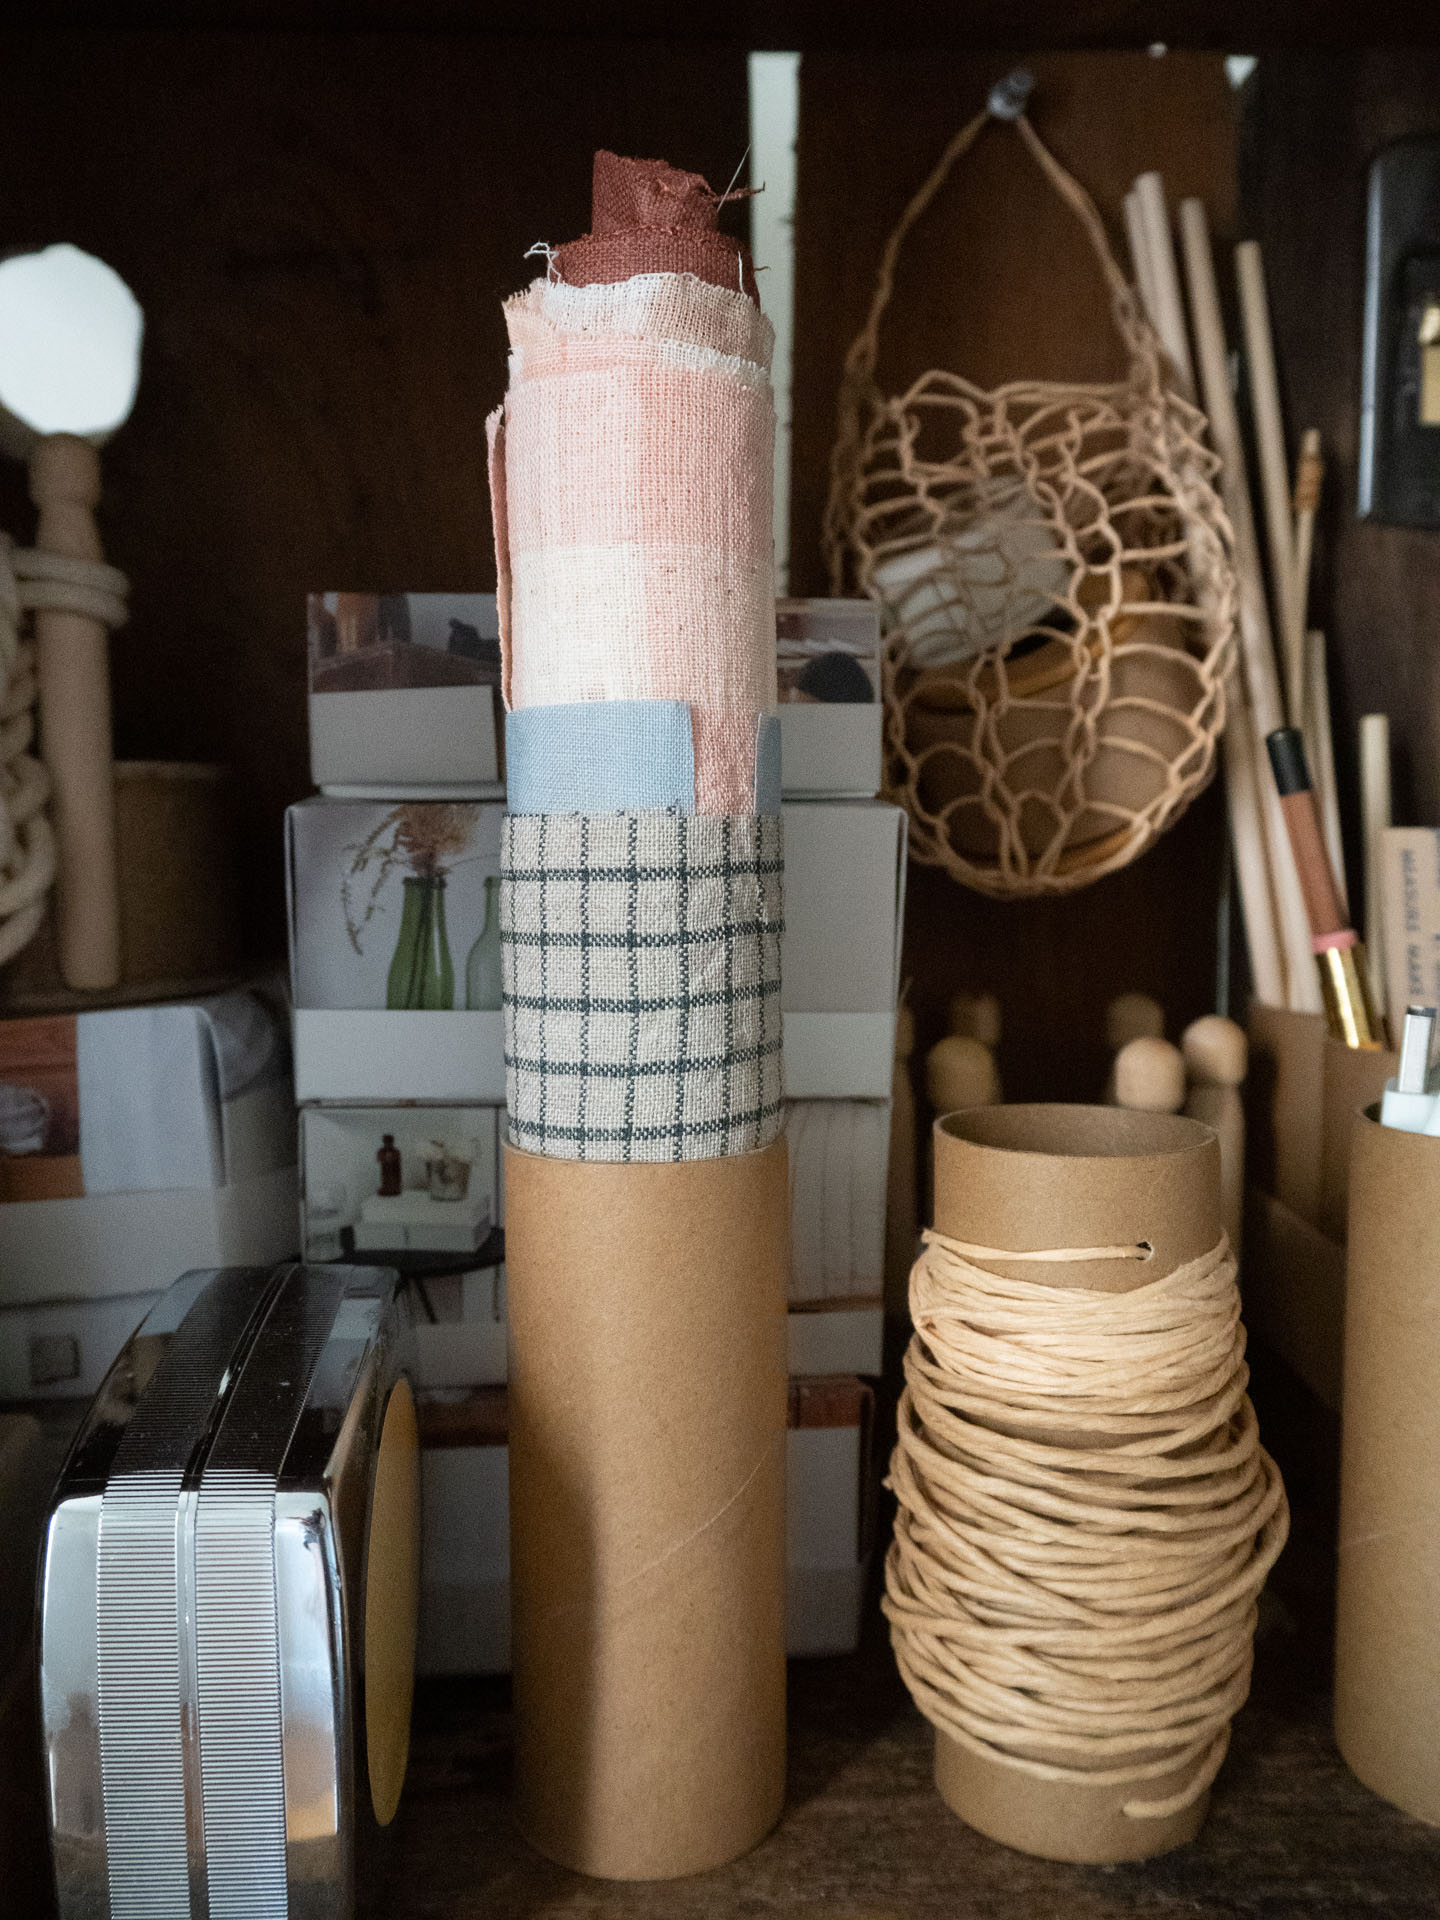 Use up all those toilet paper rolls you've been hoarding with fun